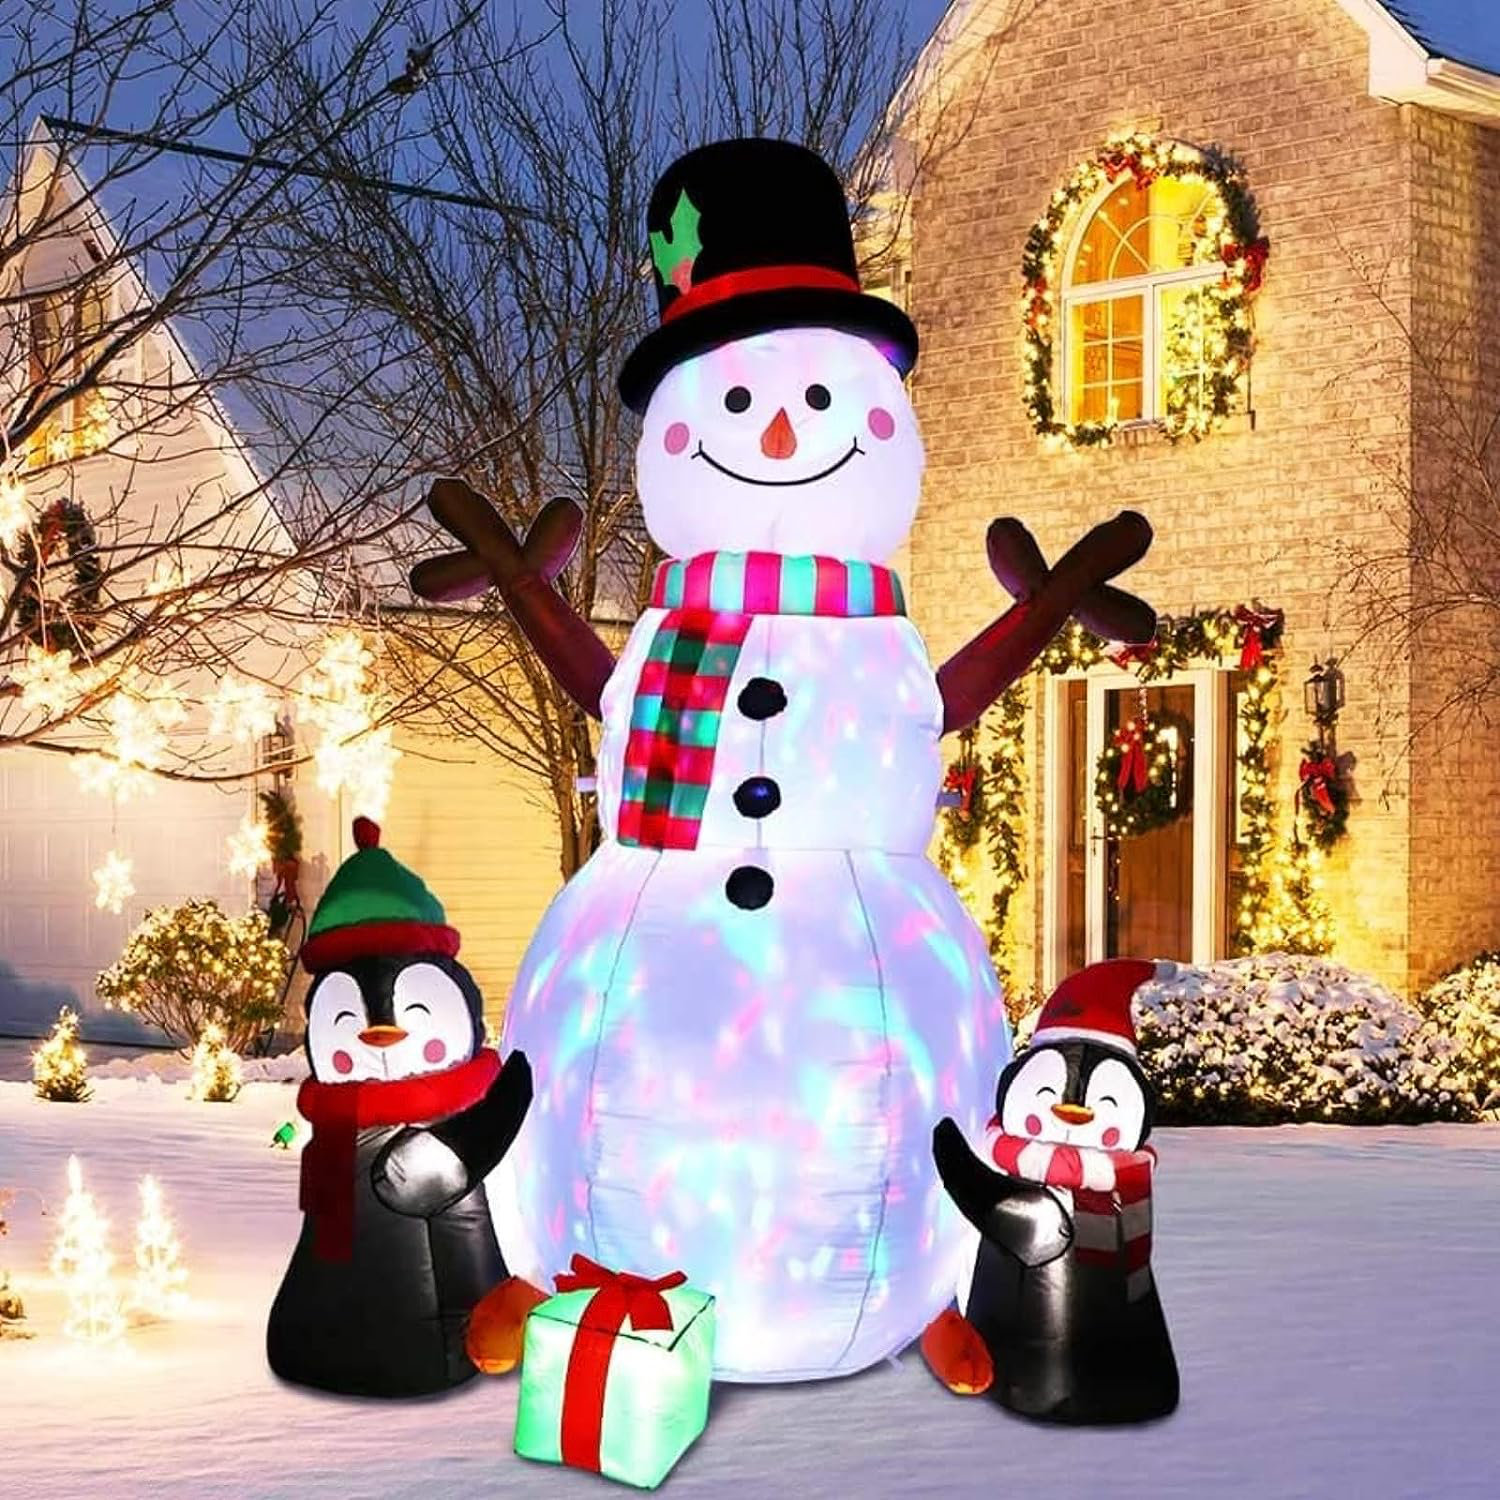 16 Pieces Christmas Snowman Kit Set Kids Cute Xmas Decorative Snowman  Making Kit Fun Building Snowman Toy Accessories for Xmas Holiday Winter  Party